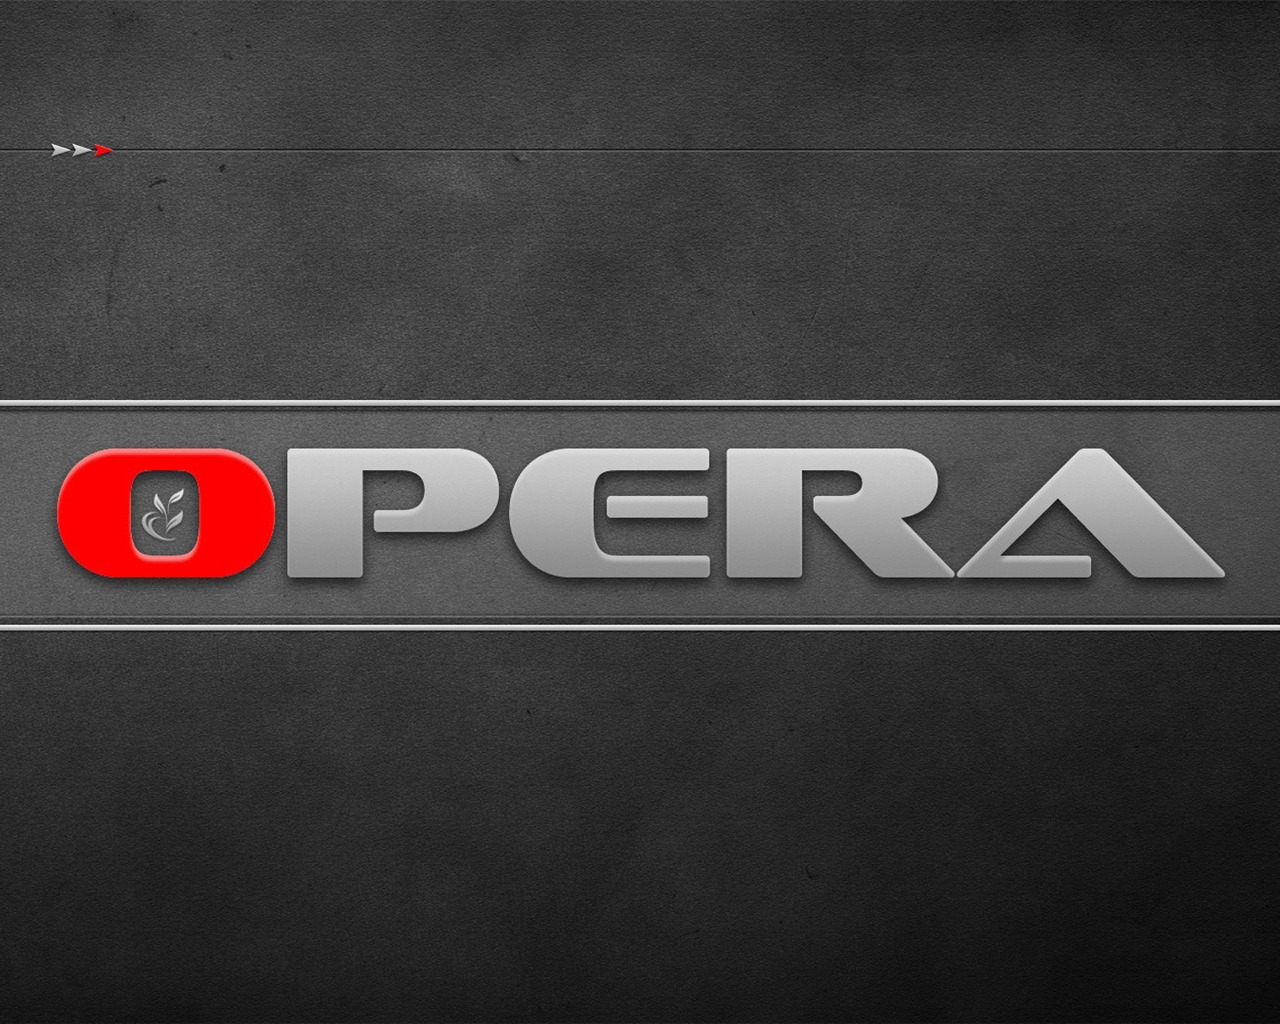 Opera for 1280 x 1024 resolution